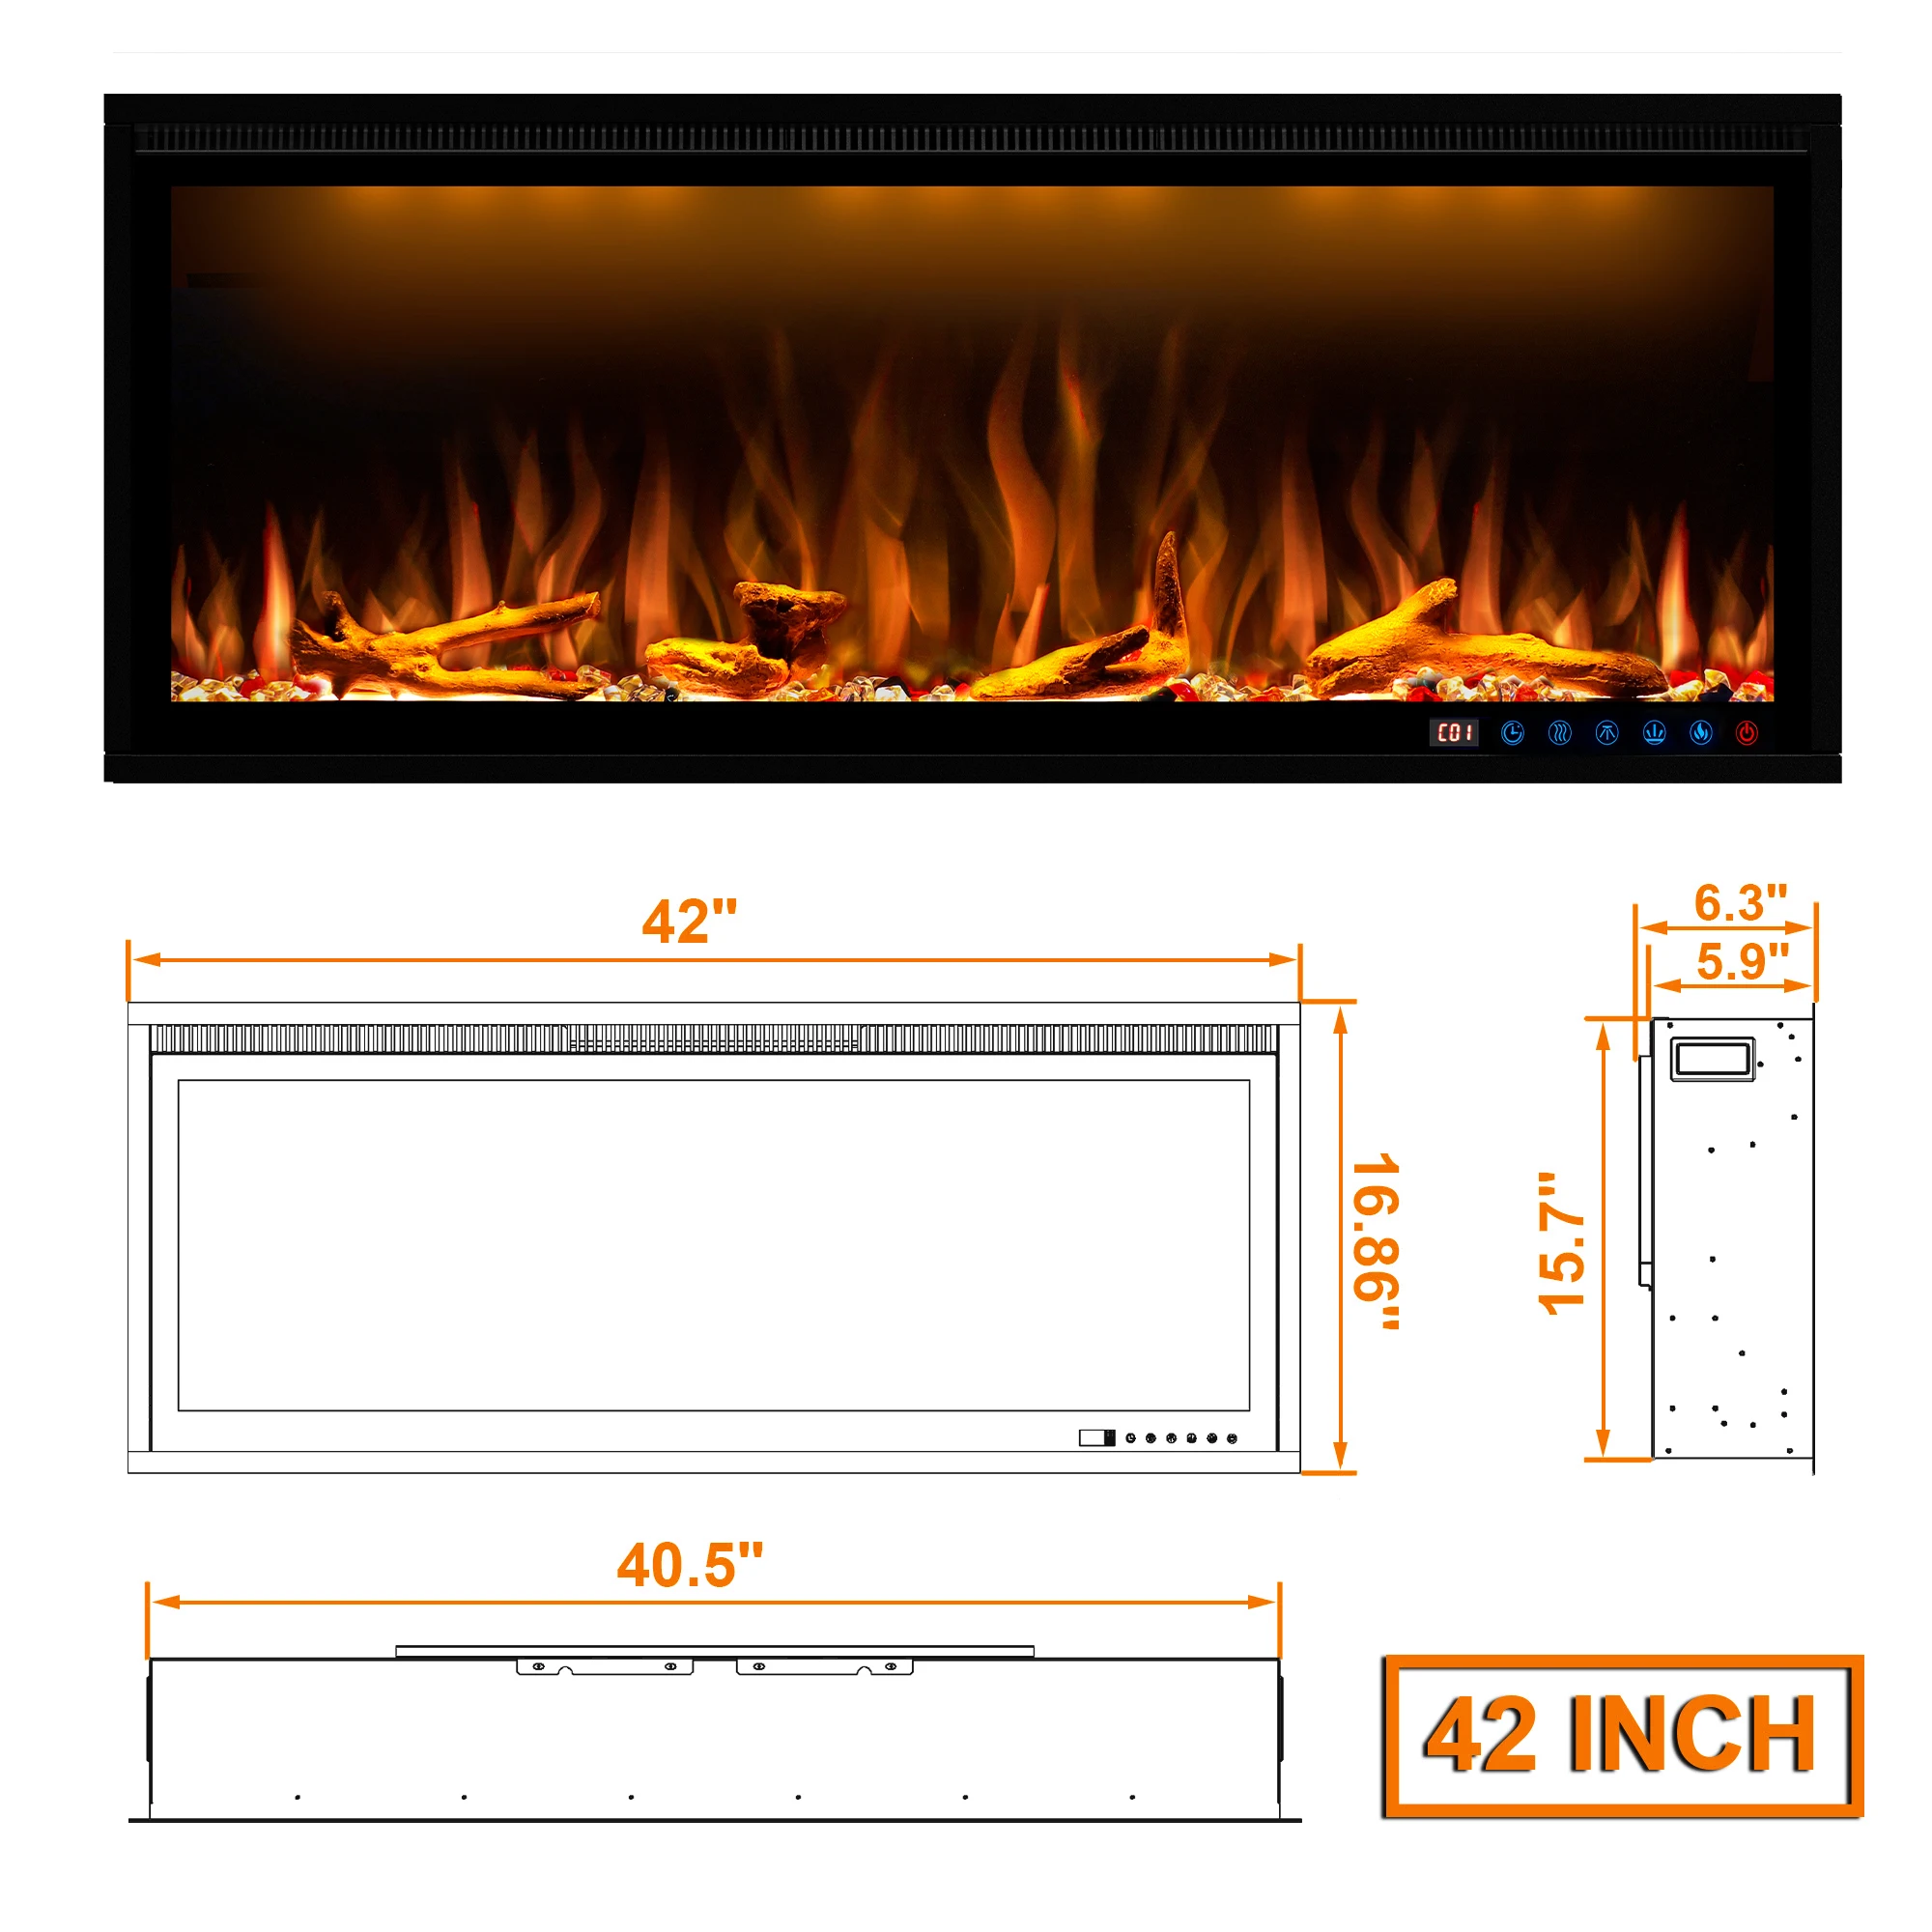 Luxstar42 Inches Smart Electric Fireplace Heater Recessed Wall-mounted Fireplace with App Control Remote Control